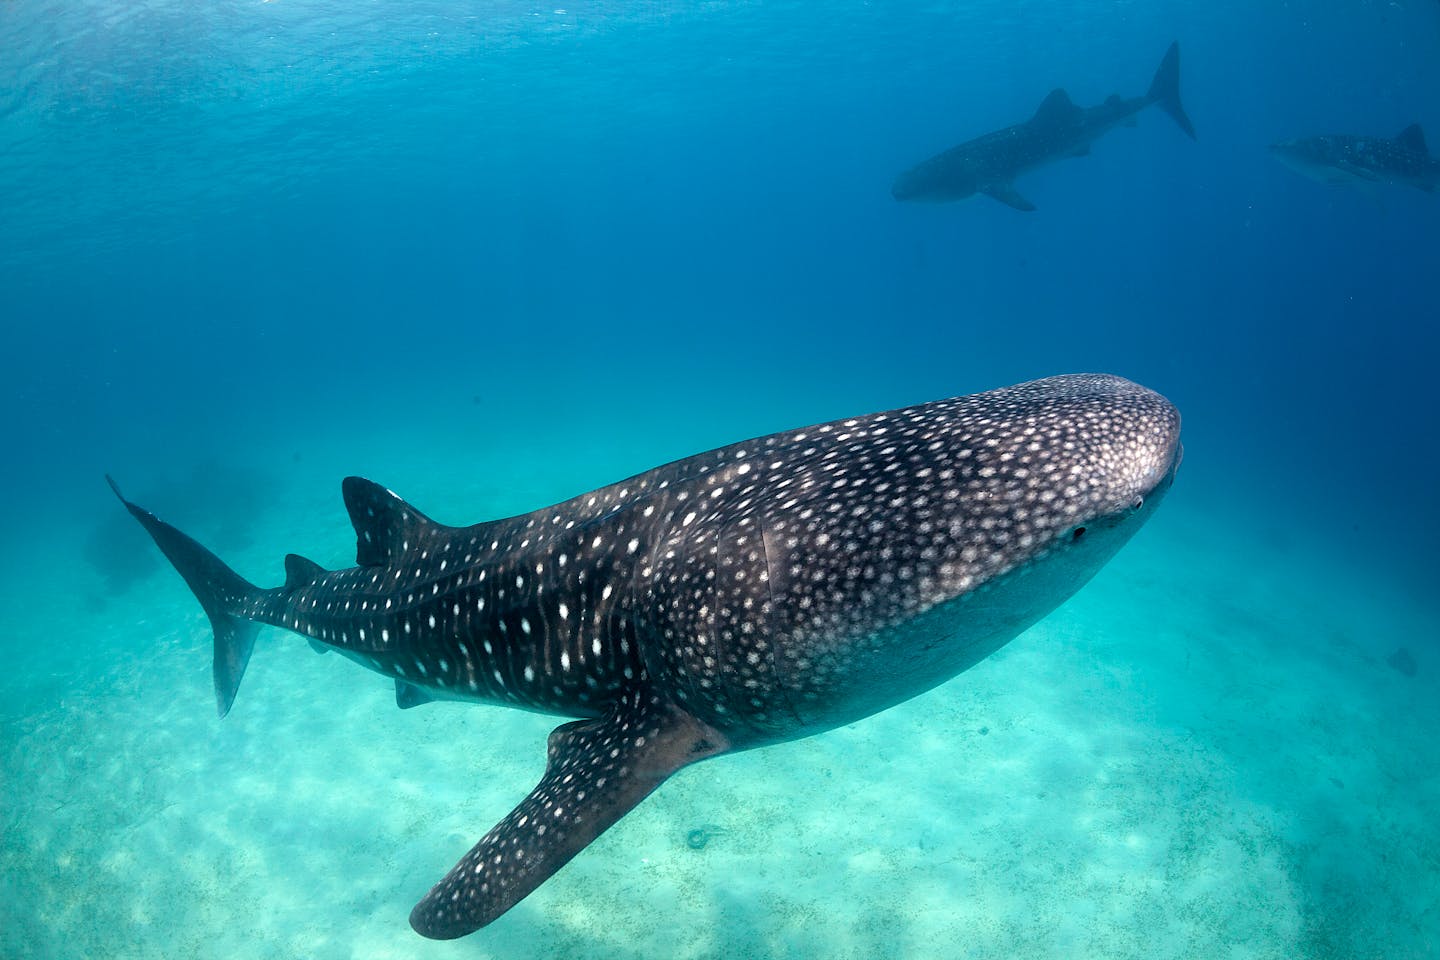 Coastal community alarmed by frequent whale shark strandings in Bay Bengal News | Eco-Business | Asia Pacific